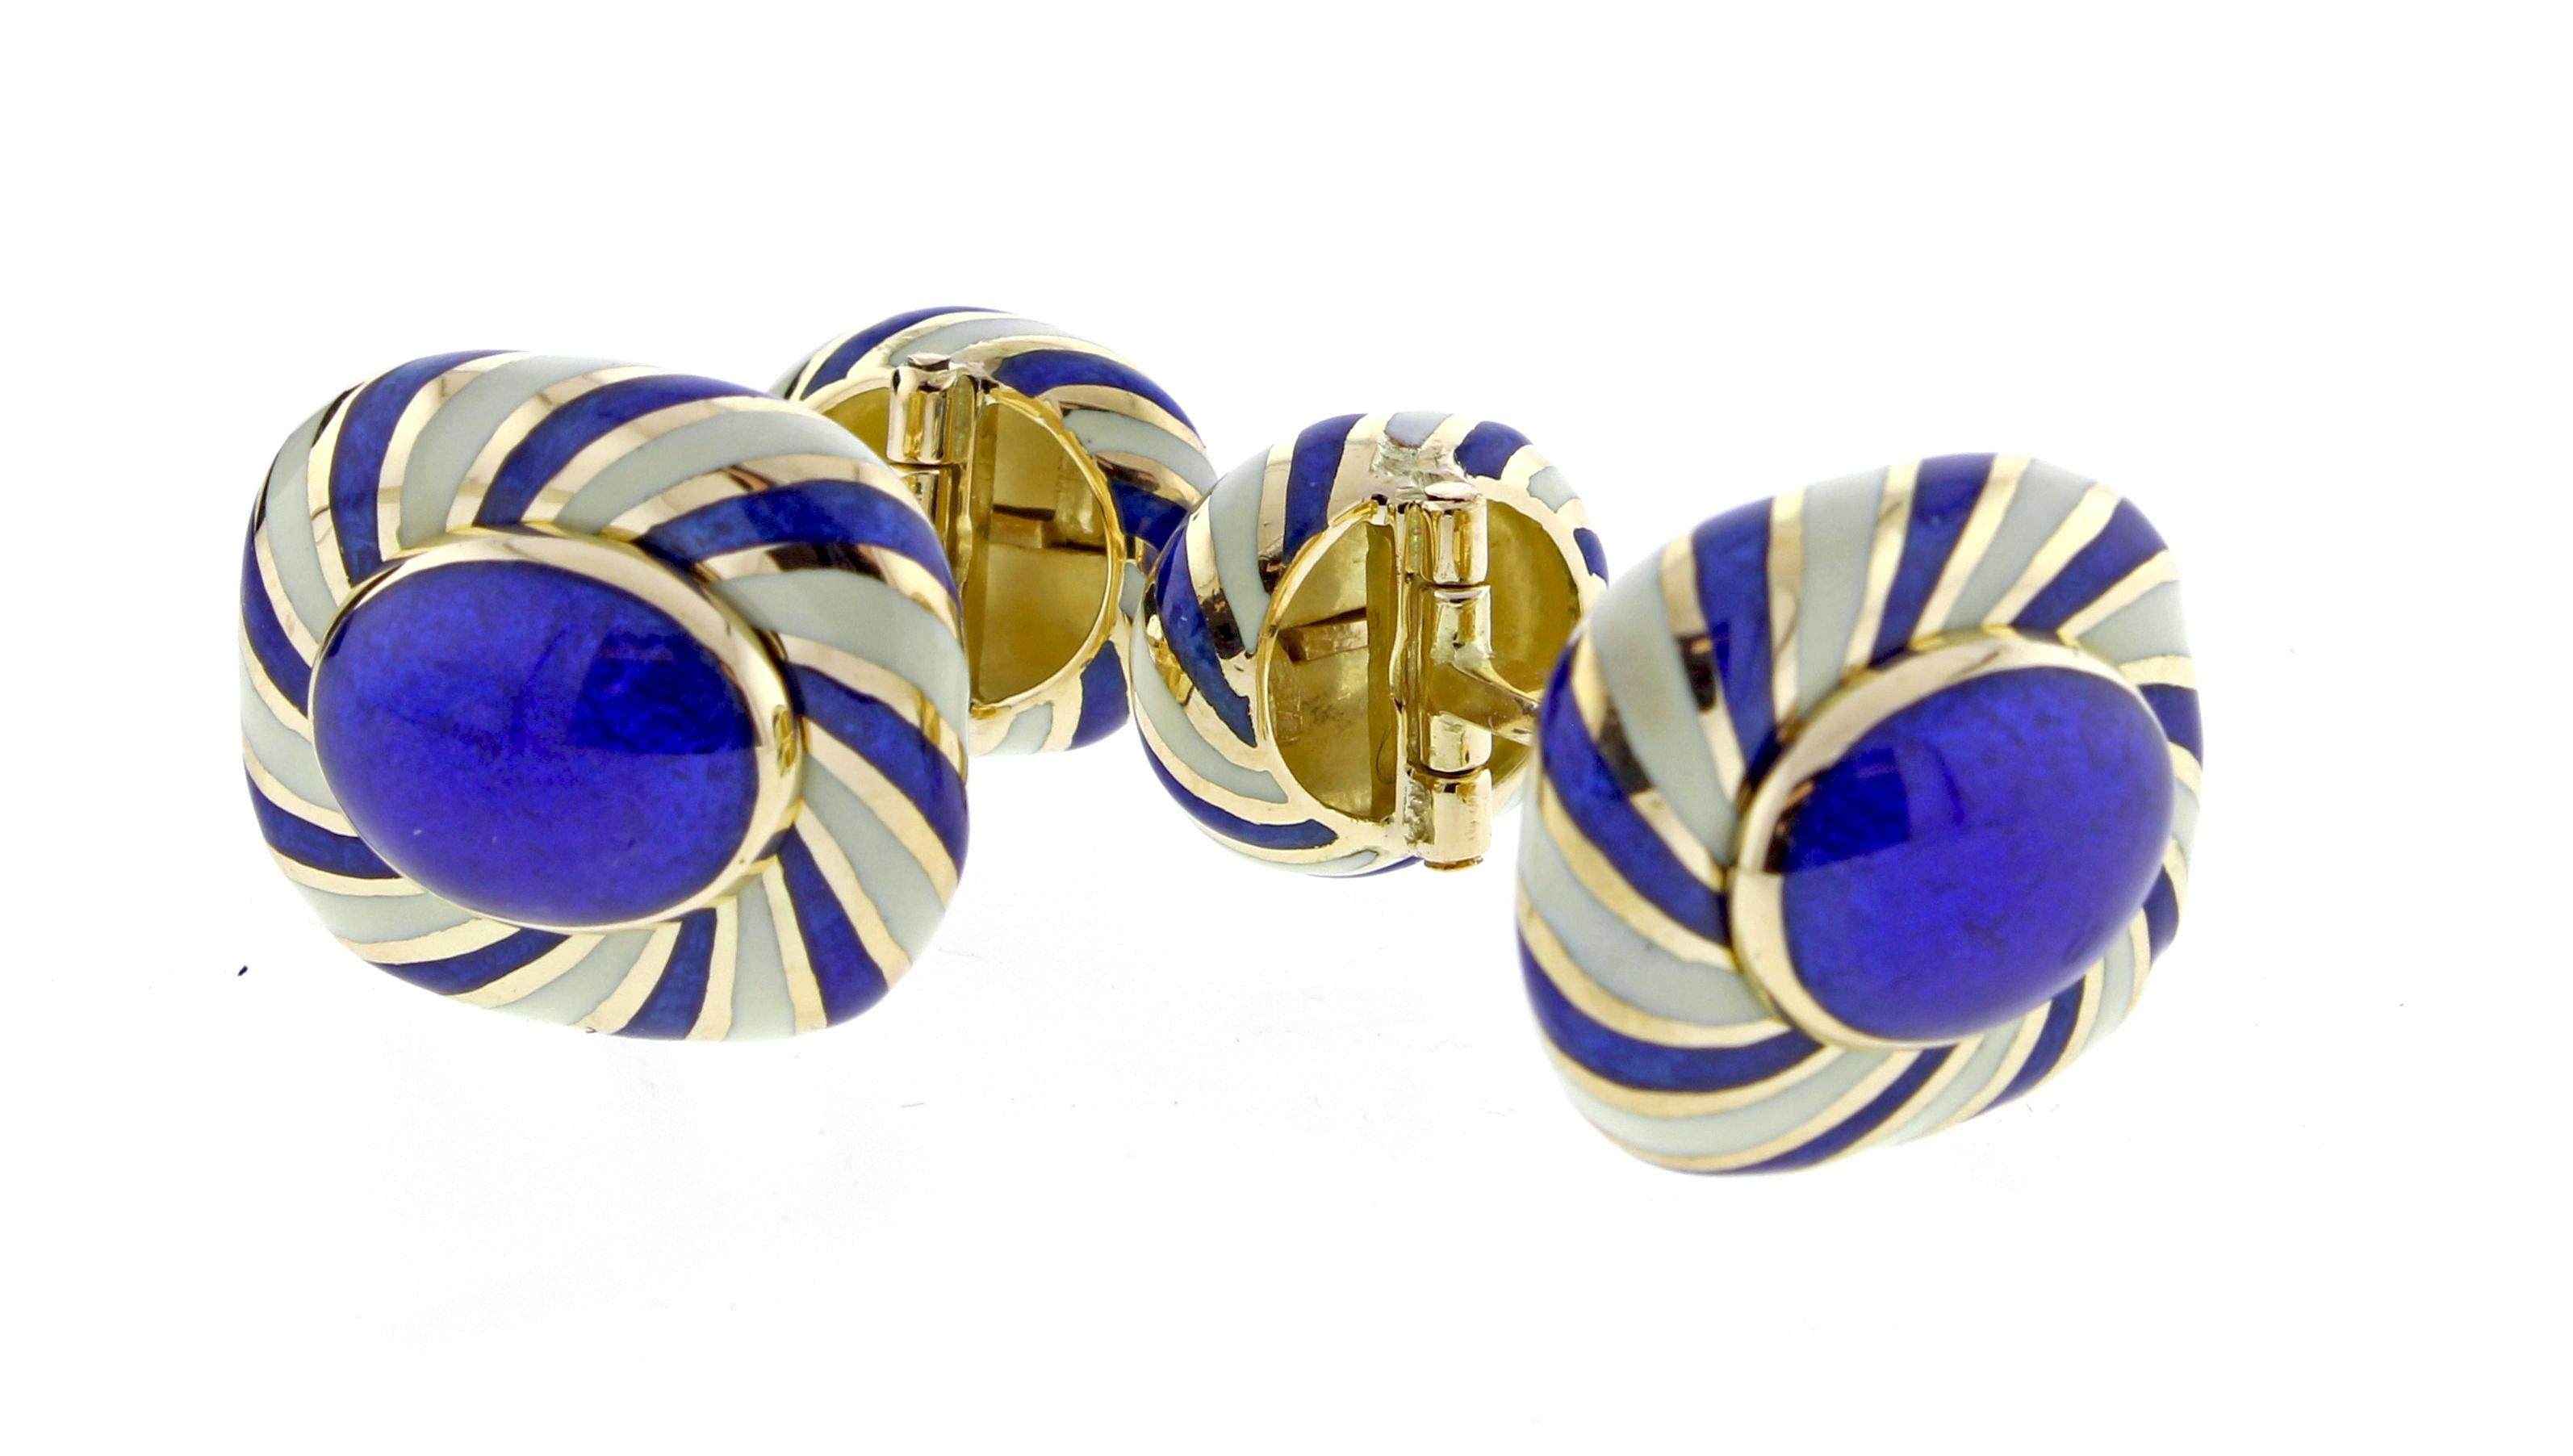 From David Webb, this distinctive pair of turban style cufflinks. The  18 karat cufflinks measure 7.8mm x 5.5mm. Swivel back design for ease of use.

